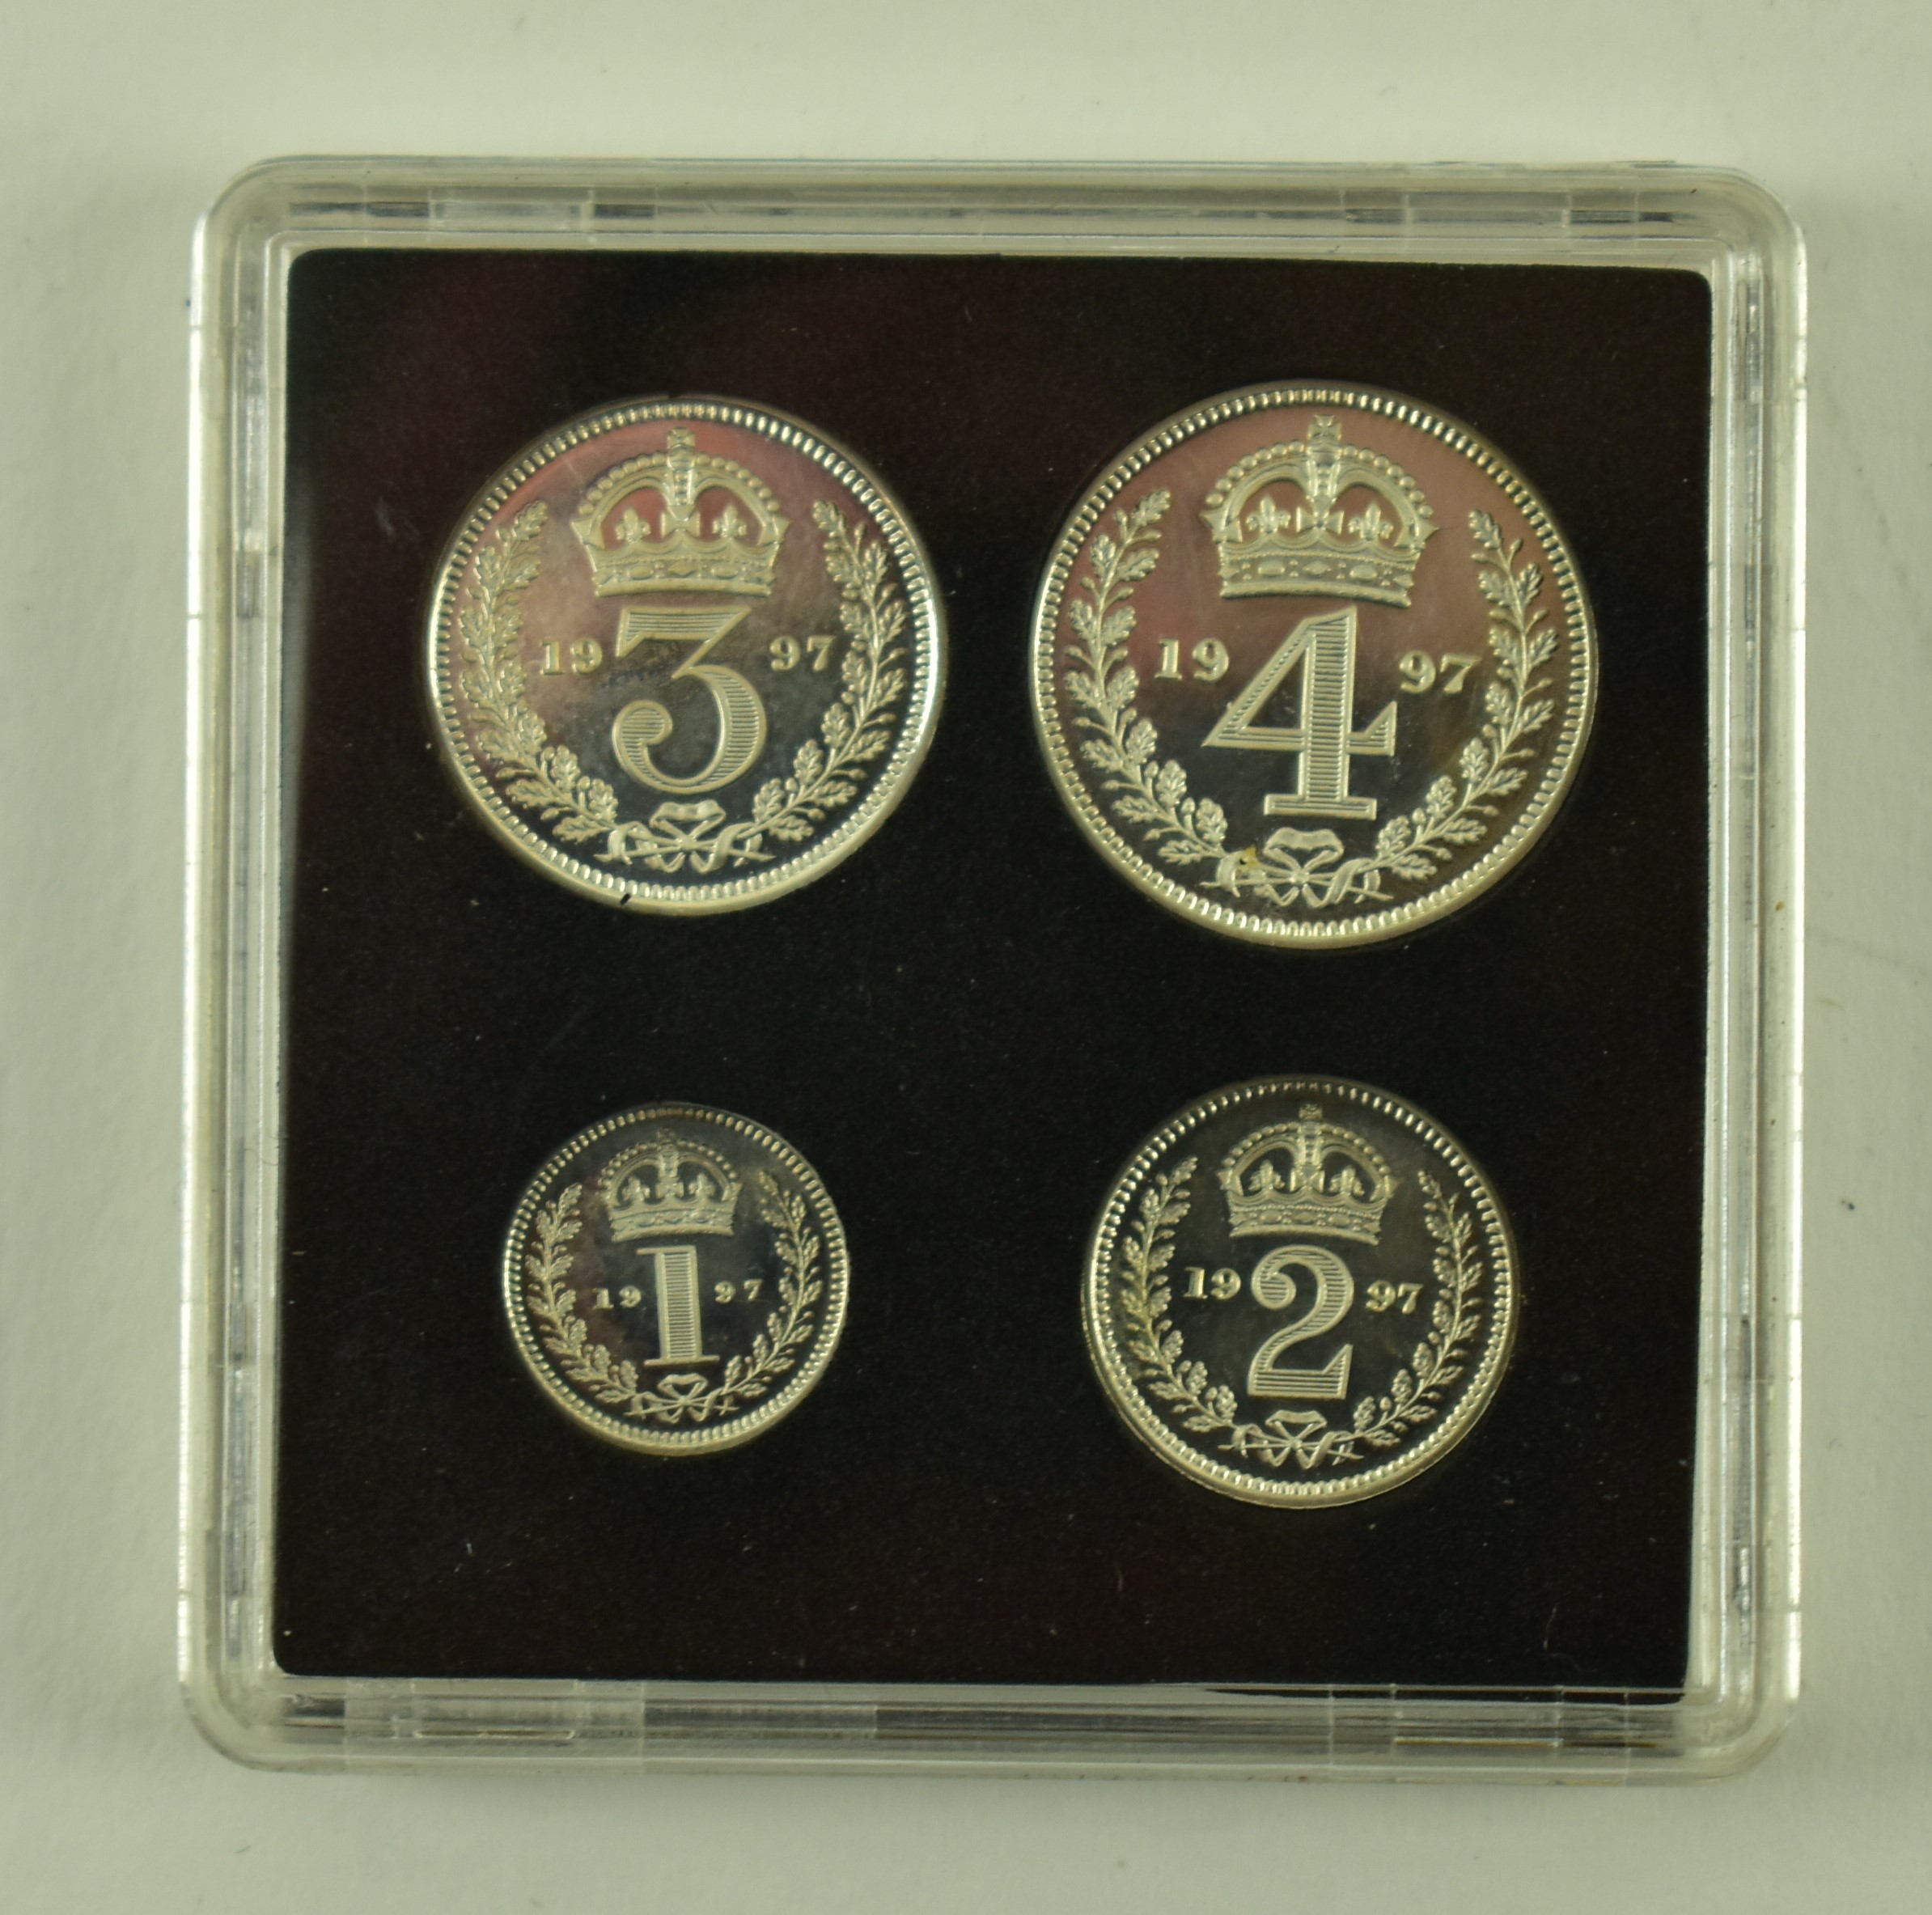 1997 QUEEN ELIZABETH II SILVER MAUNDY FOUR COINS SET - Image 2 of 2